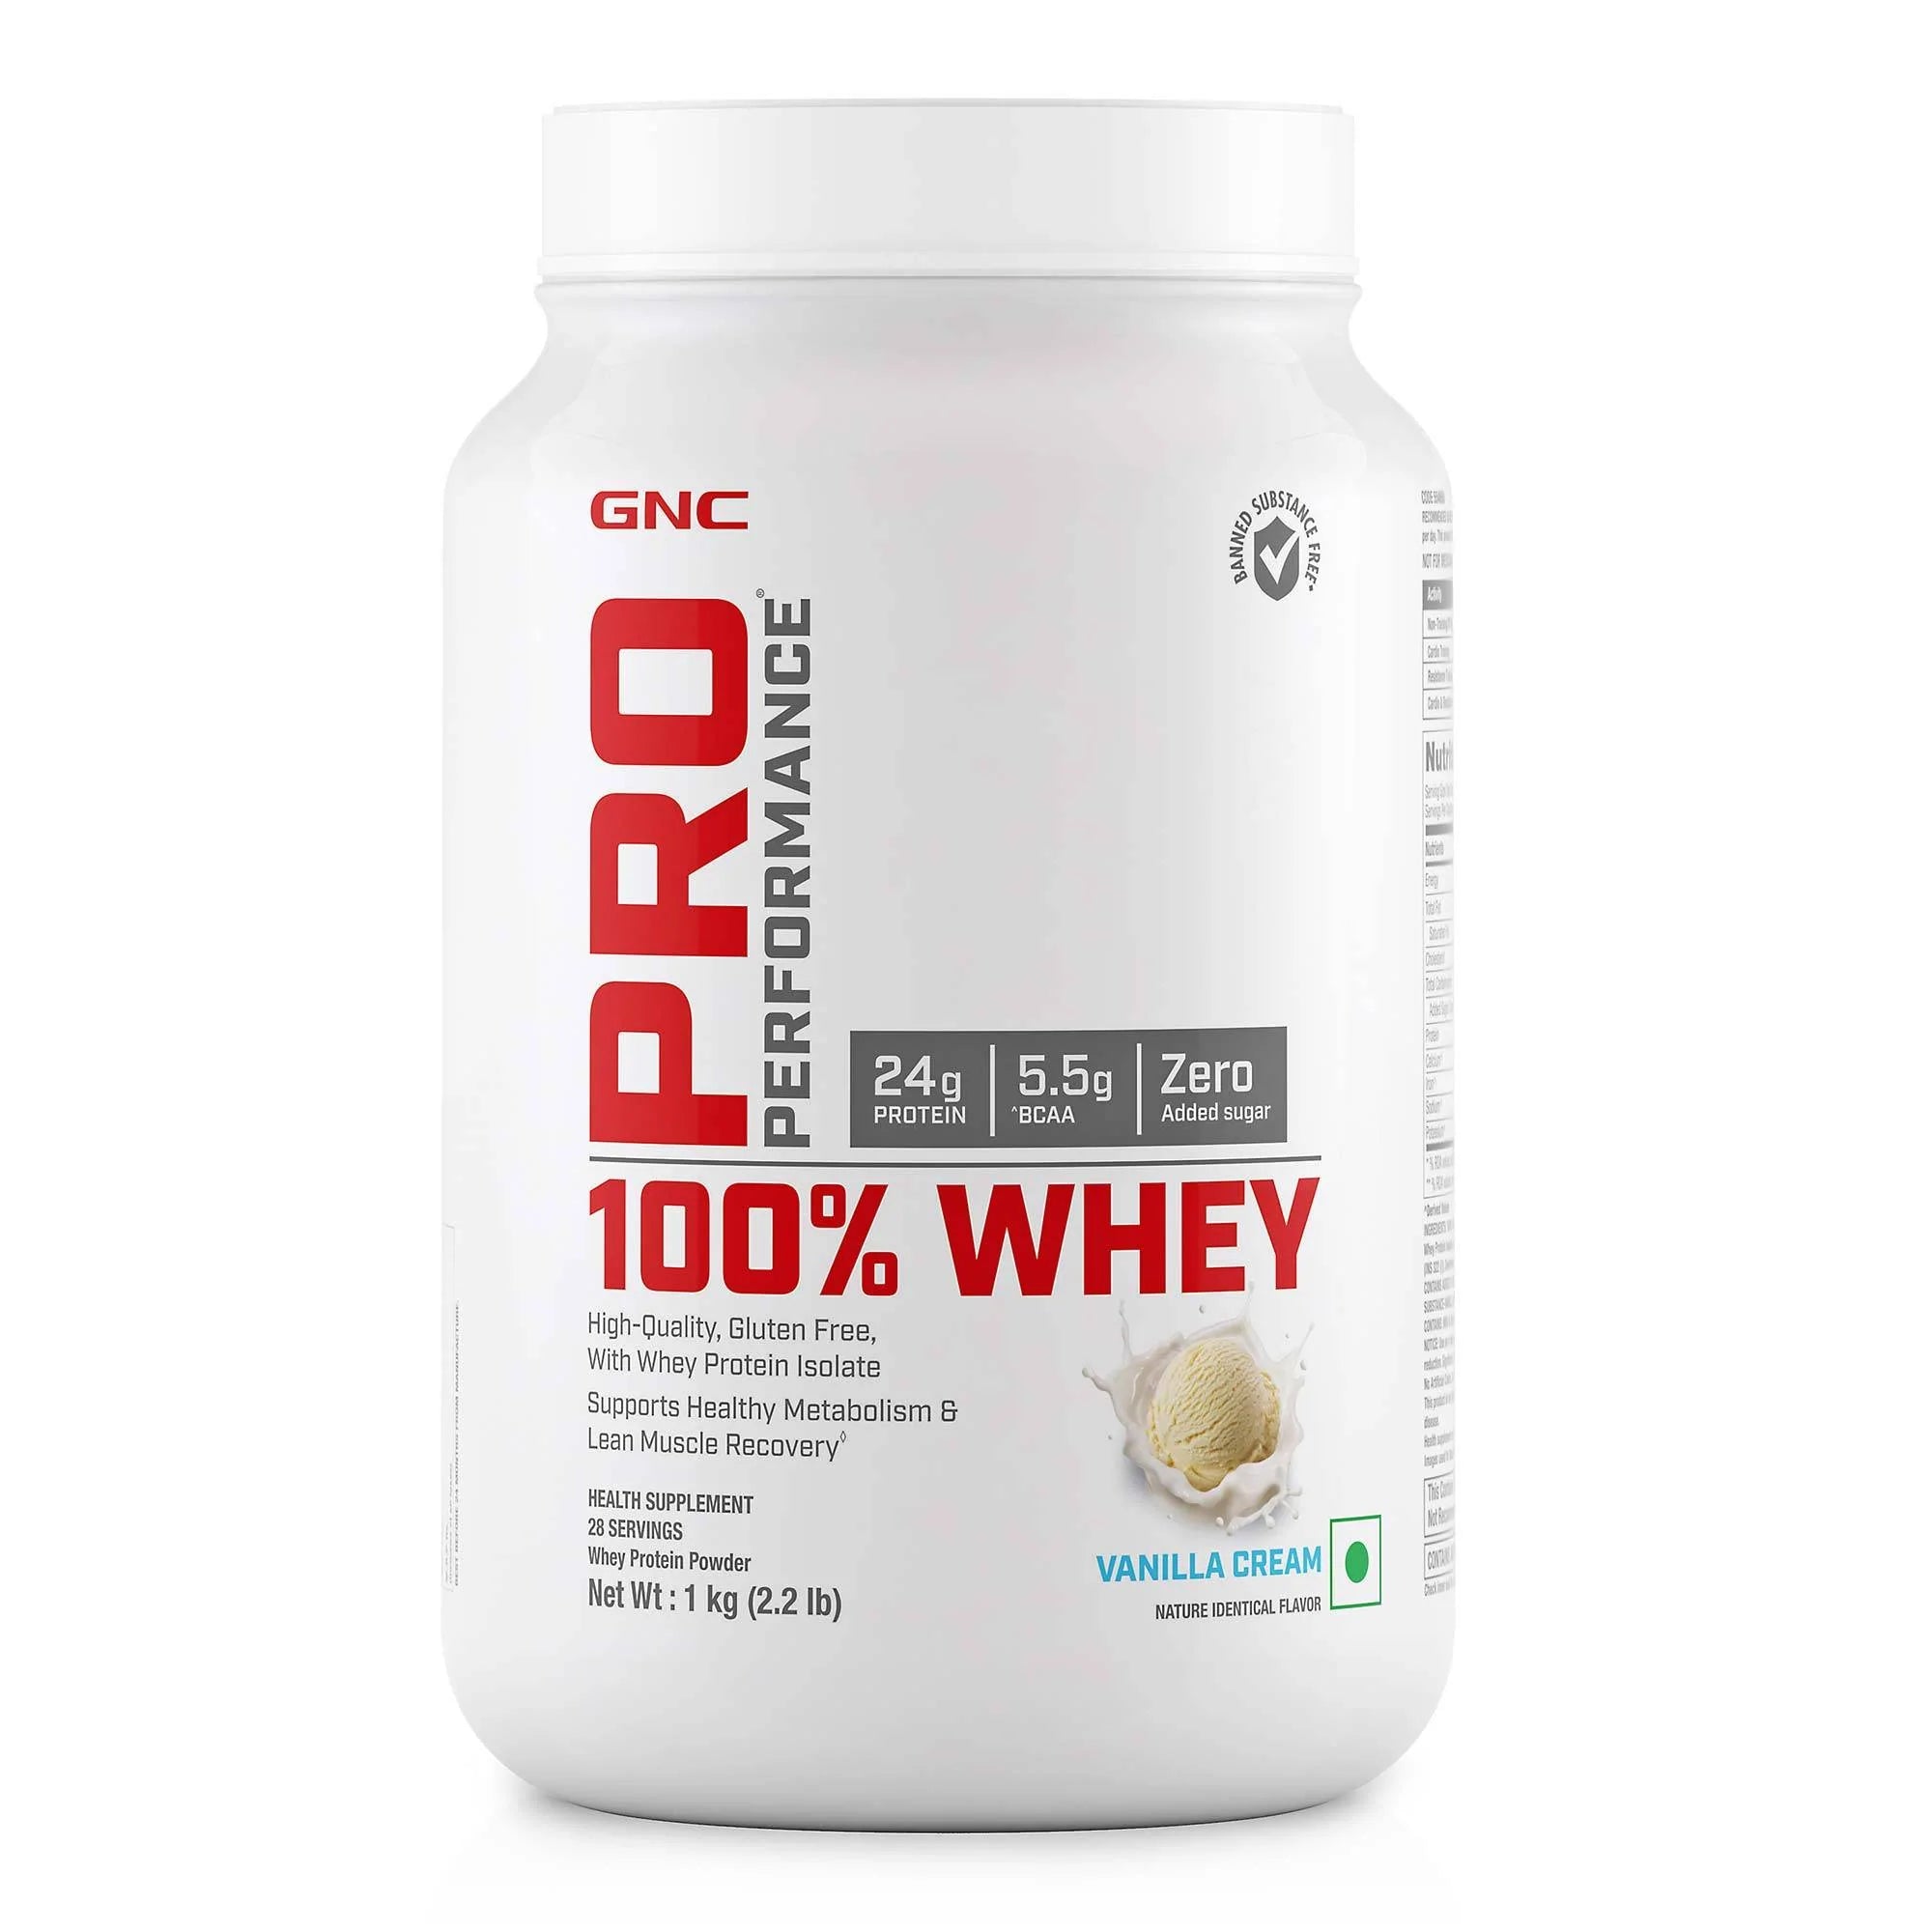 Gnc Pro 100% Whey Protein 1Kg, 2.2lb (30Servings) and Get free calcium plus (60N)